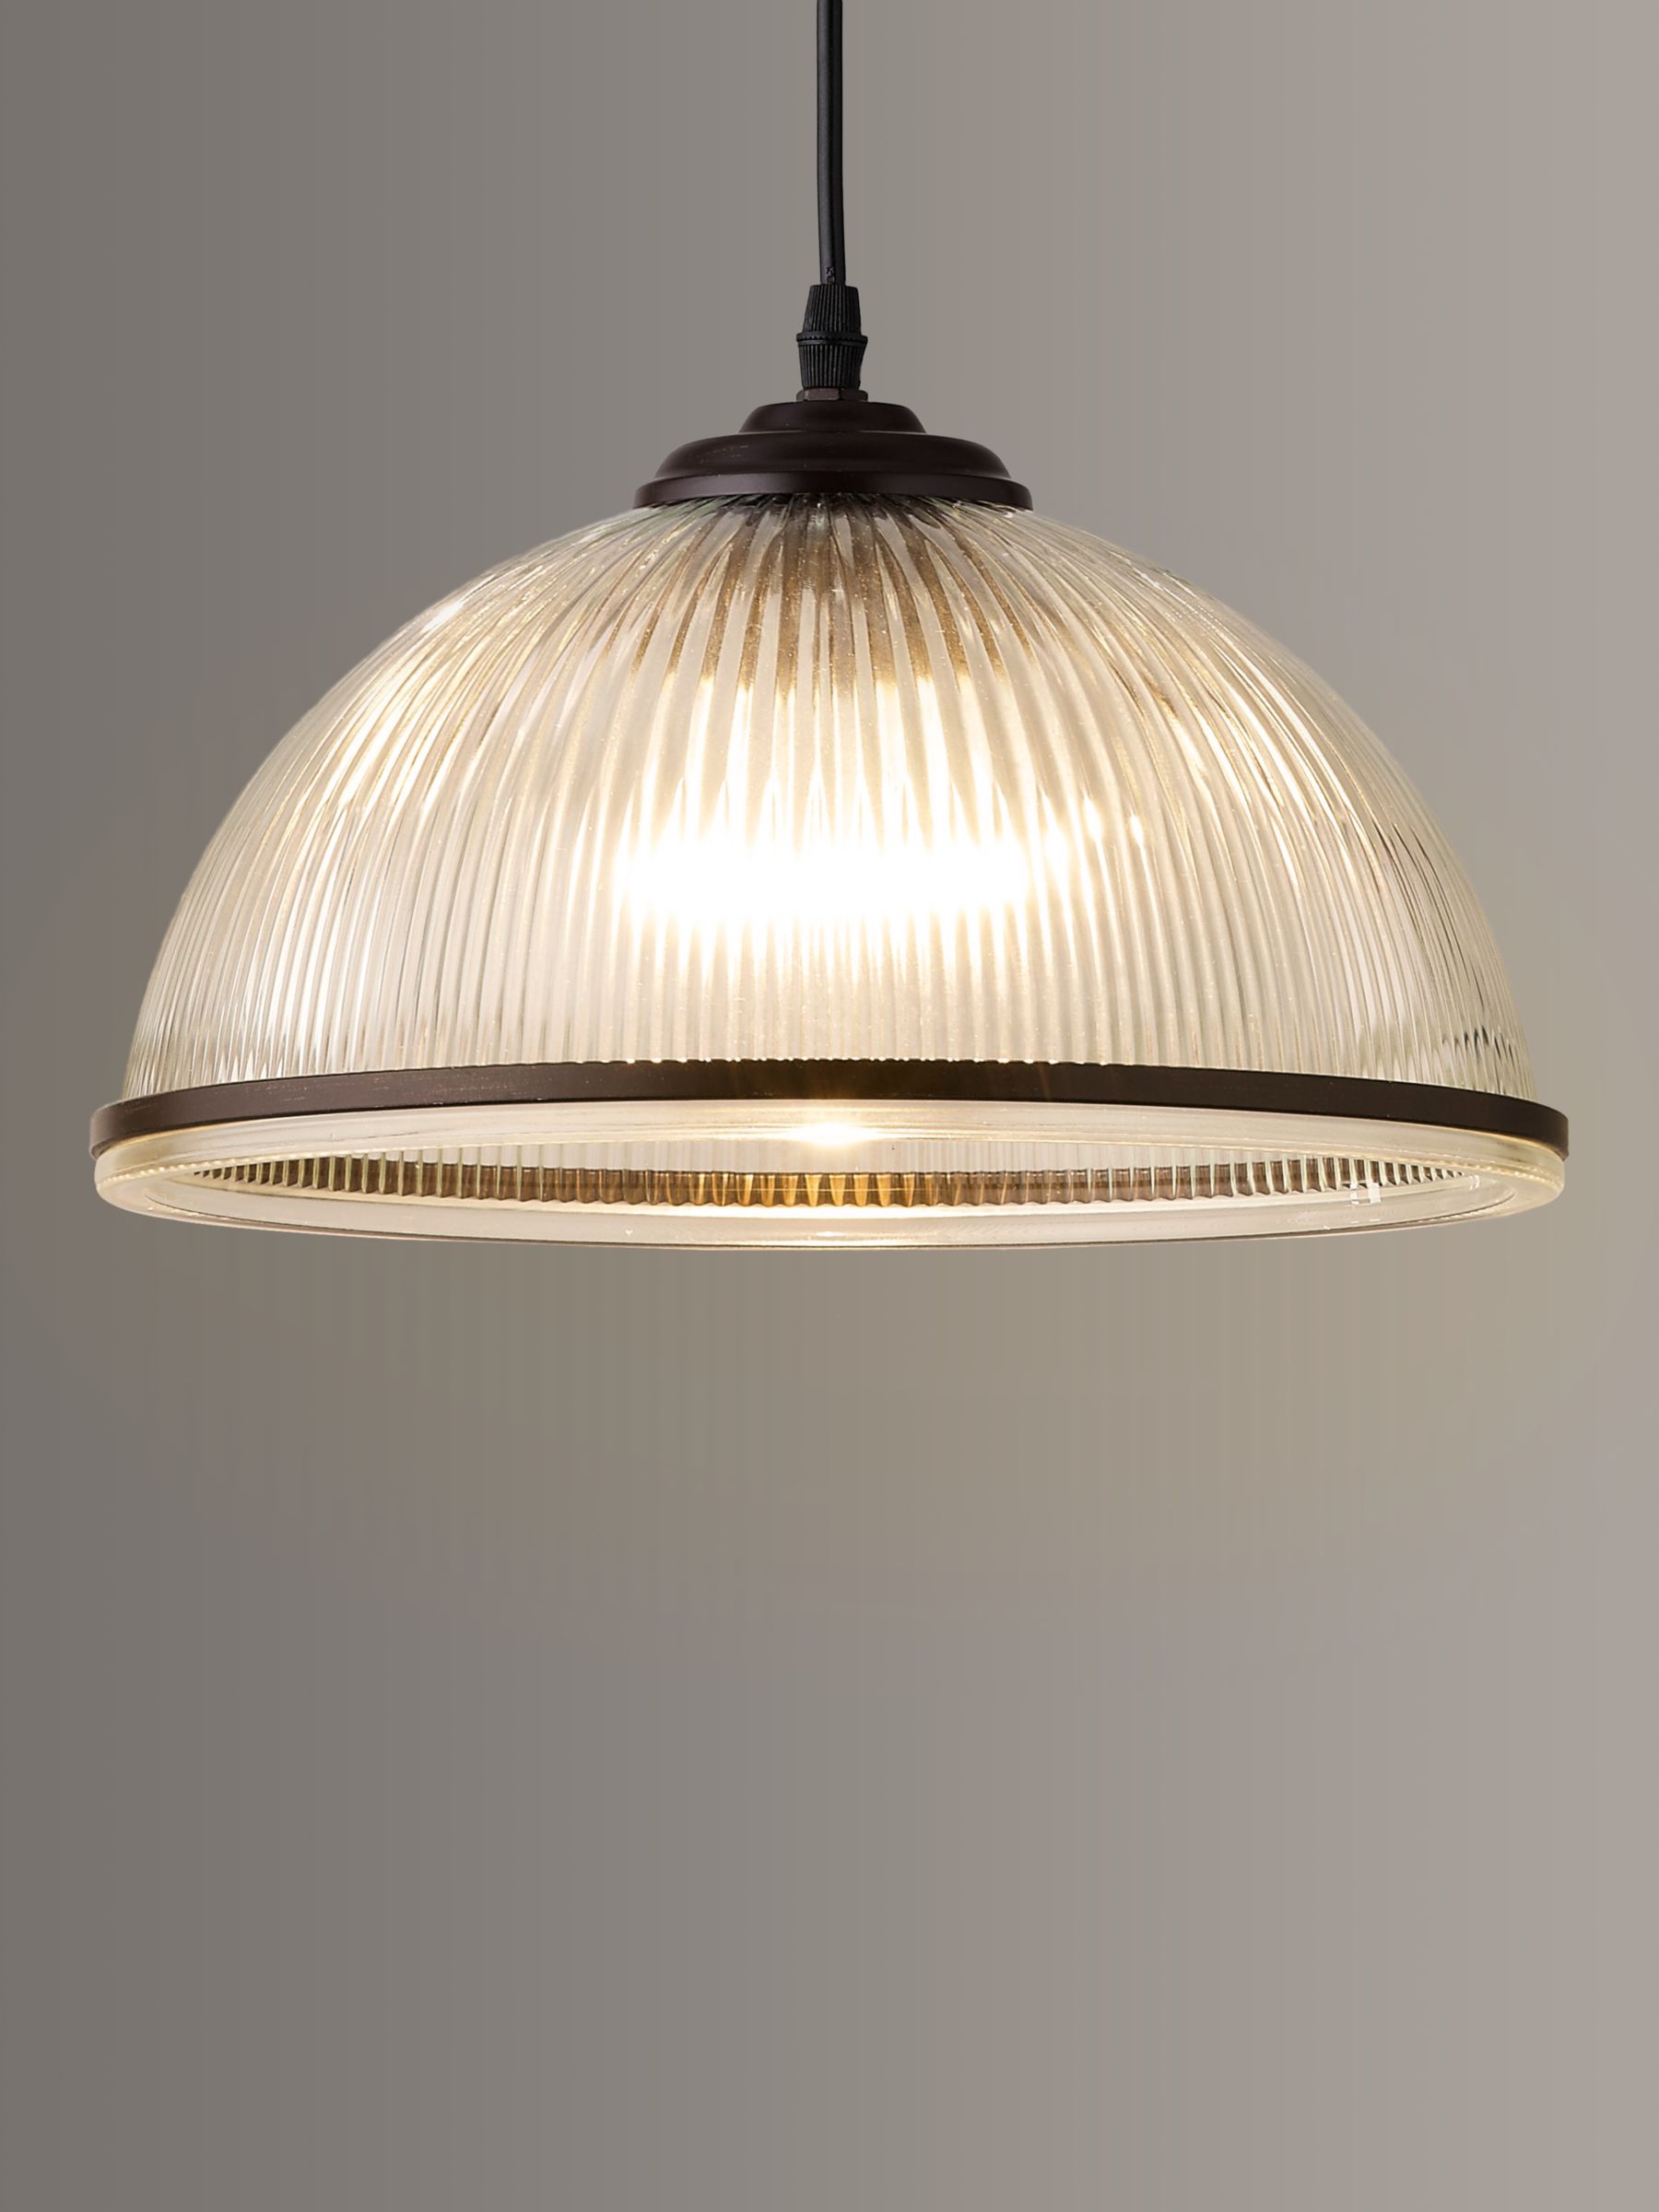 Croft Collection Tristan Ceiling Light At John Lewis Partners